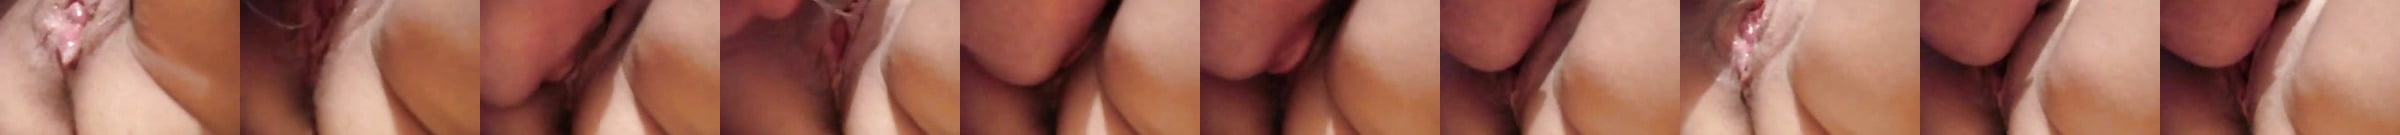 He Eats Cum From Her Pussy Free Eating Her Out Porn Video